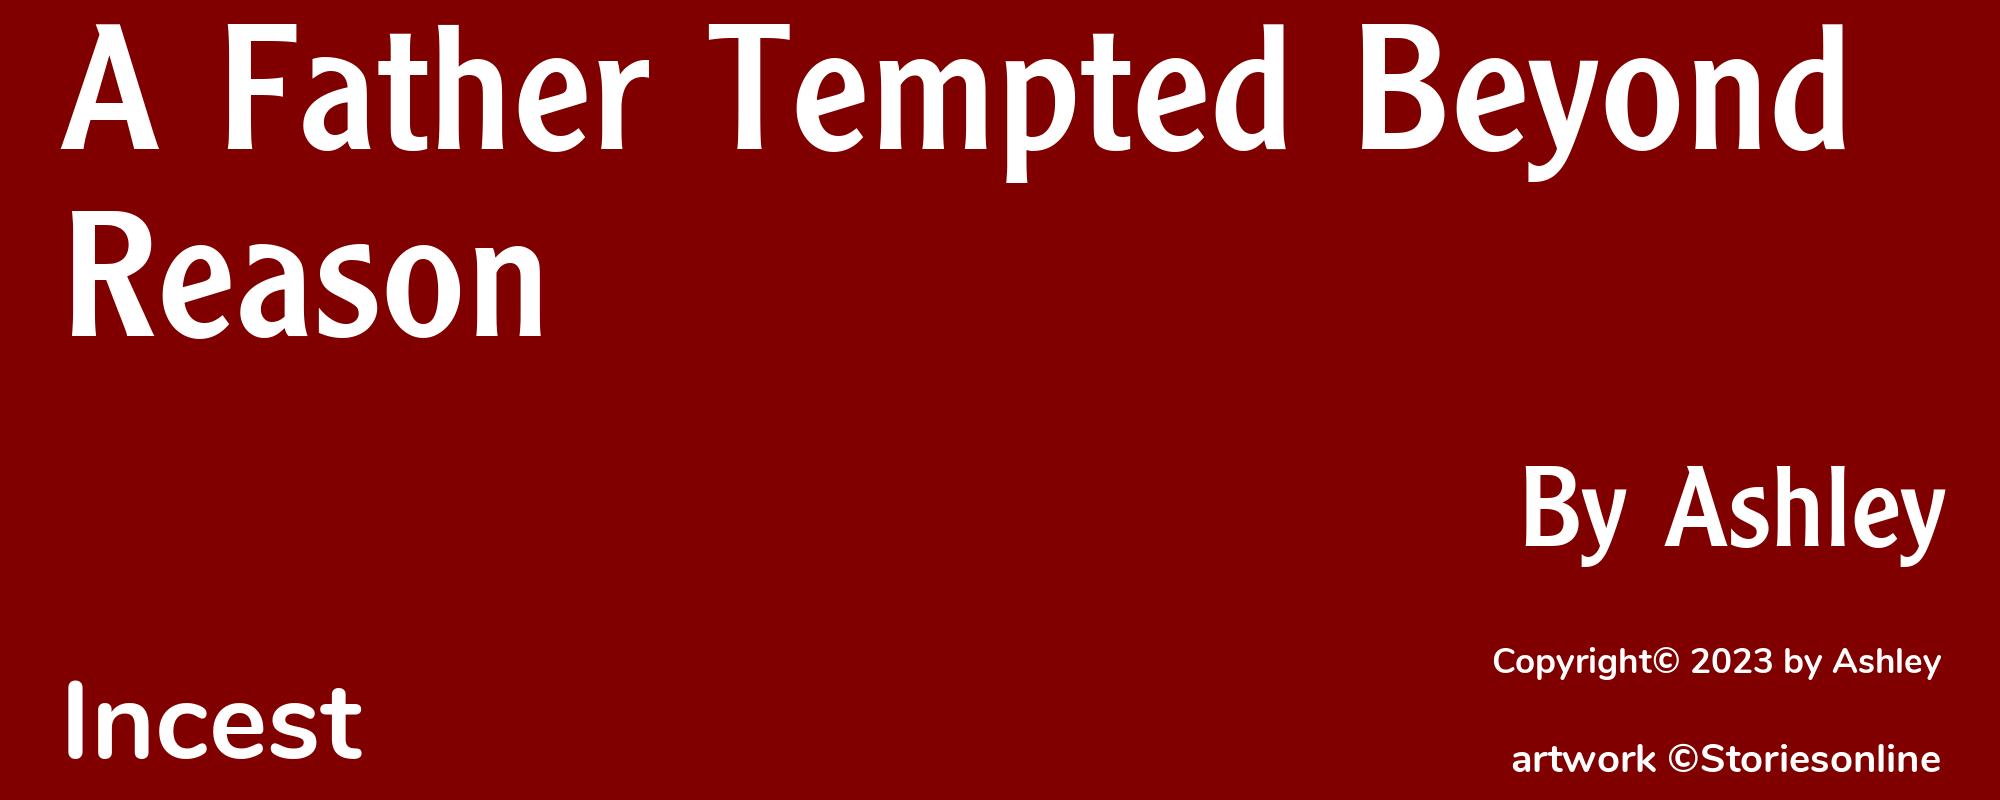 A Father Tempted Beyond Reason - Cover